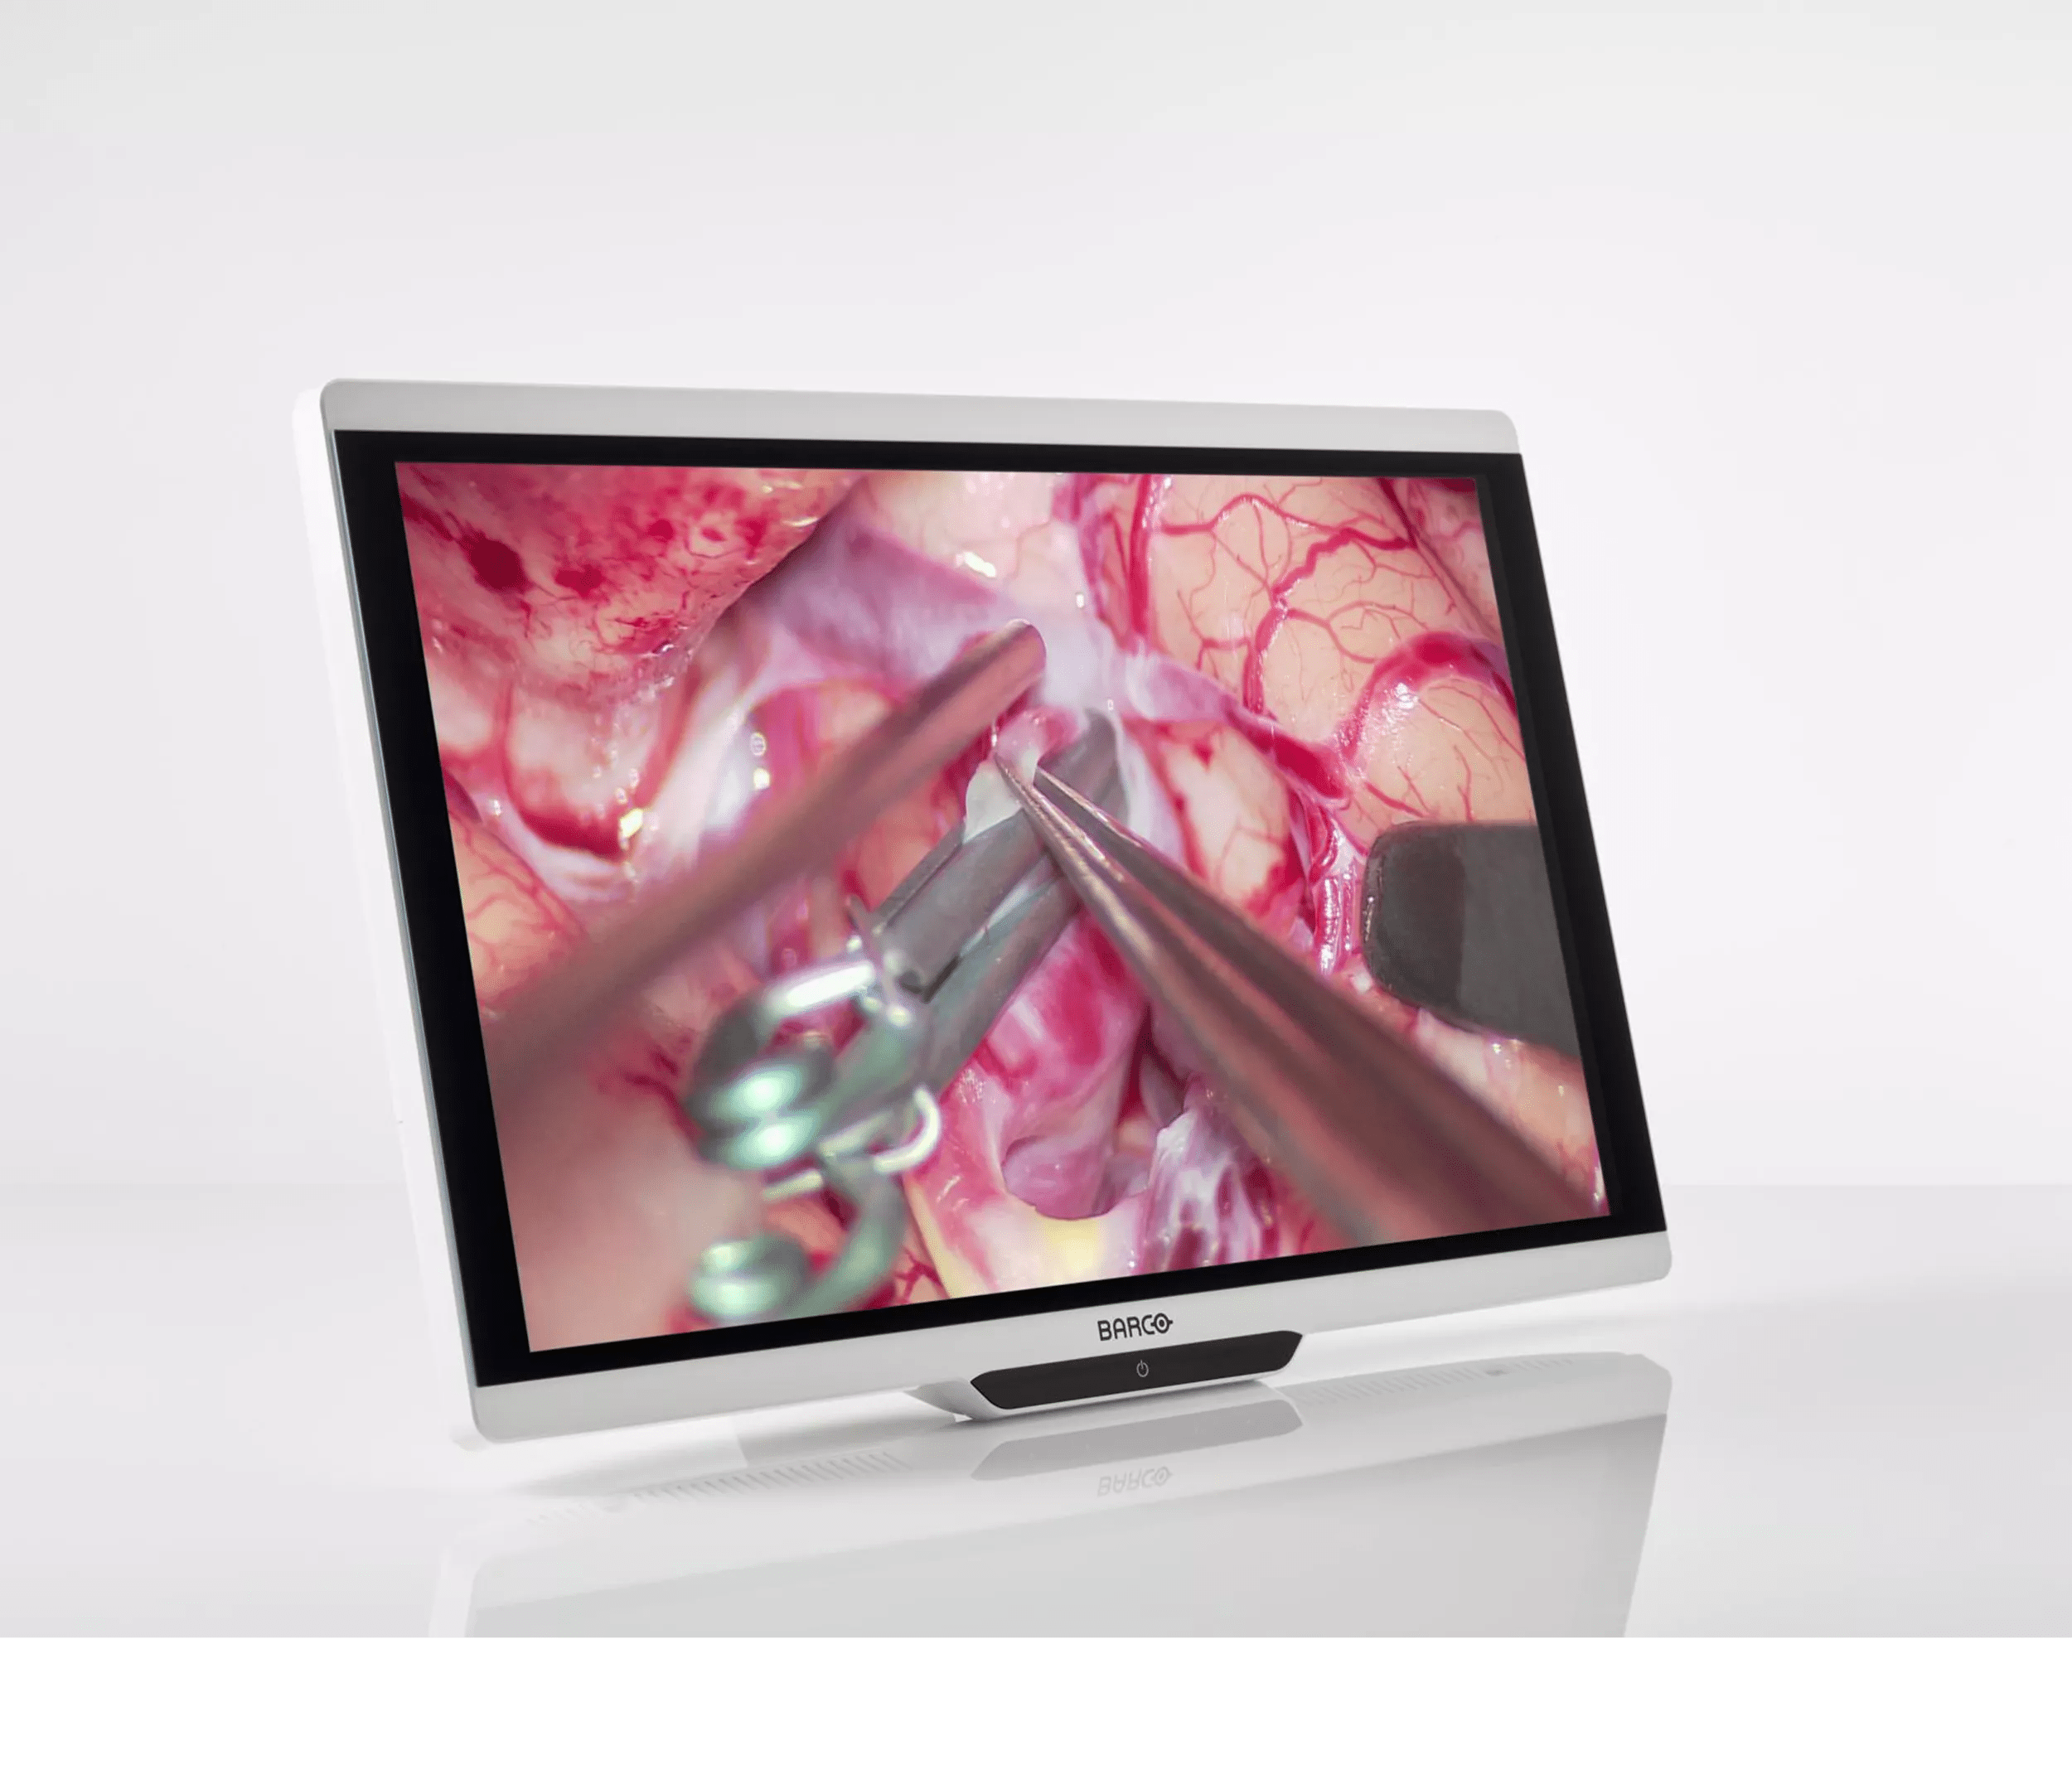 Barco's MDSC-8427 surgical display